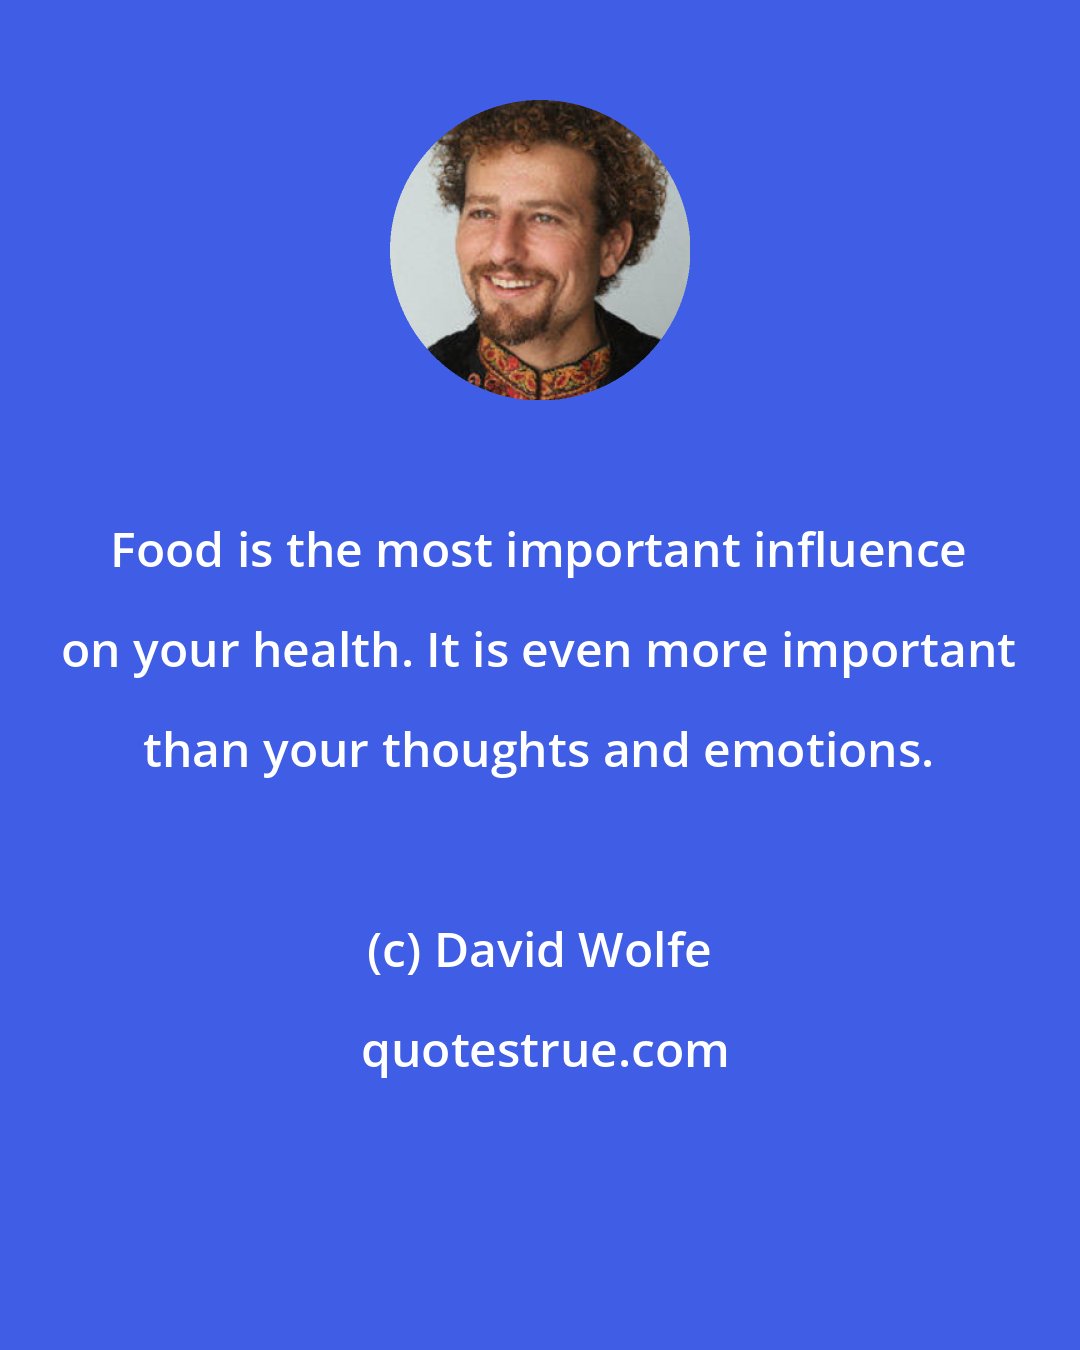 David Wolfe: Food is the most important influence on your health. It is even more important than your thoughts and emotions.